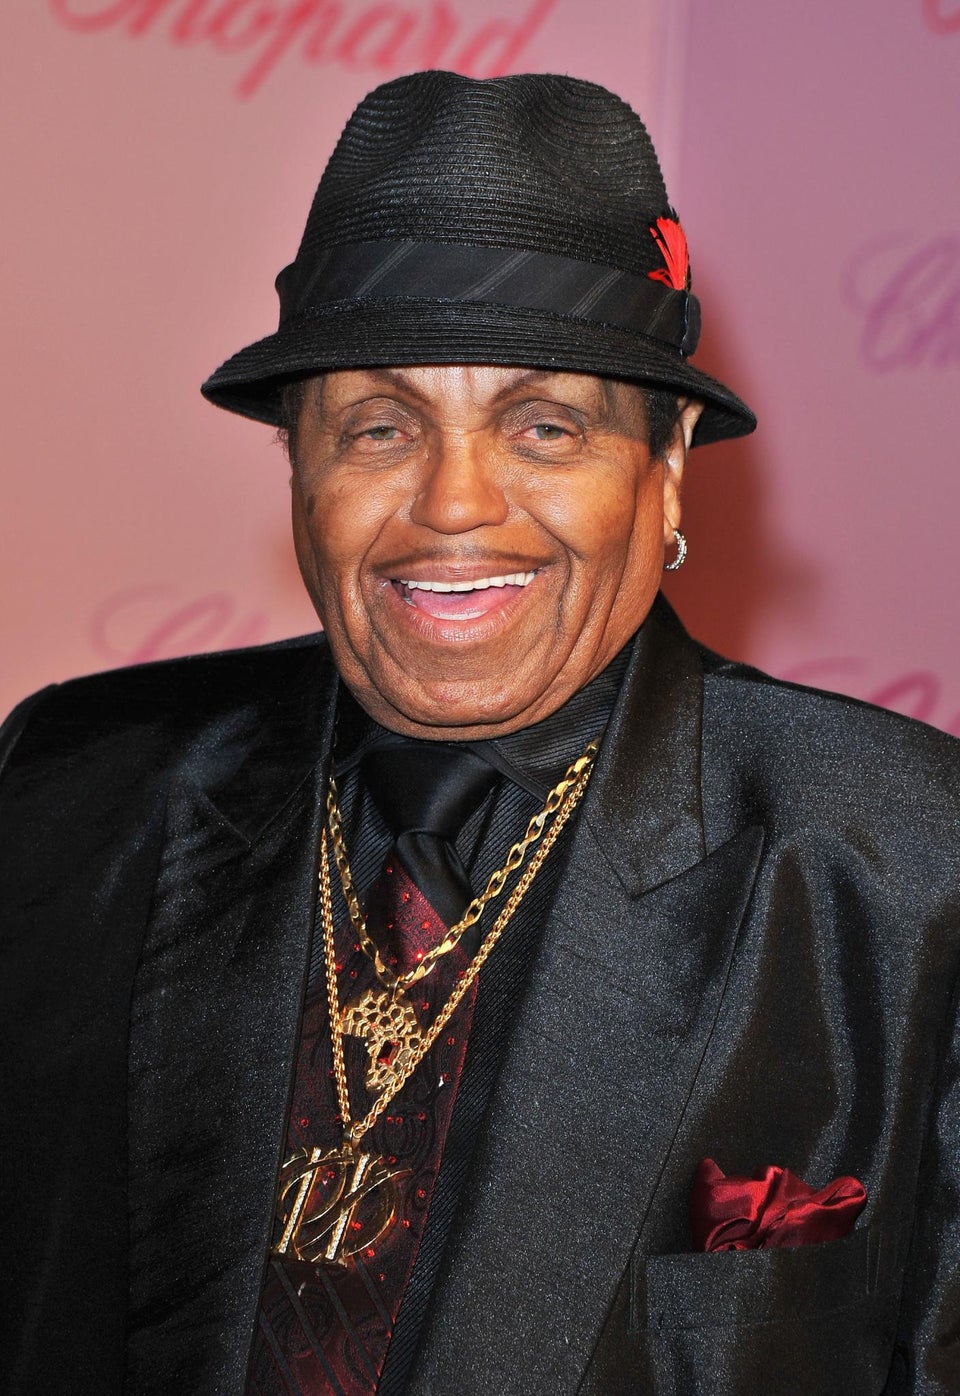 The Quick Read: Joe Jackson Is Spending Final Days Of His Life In Hospital